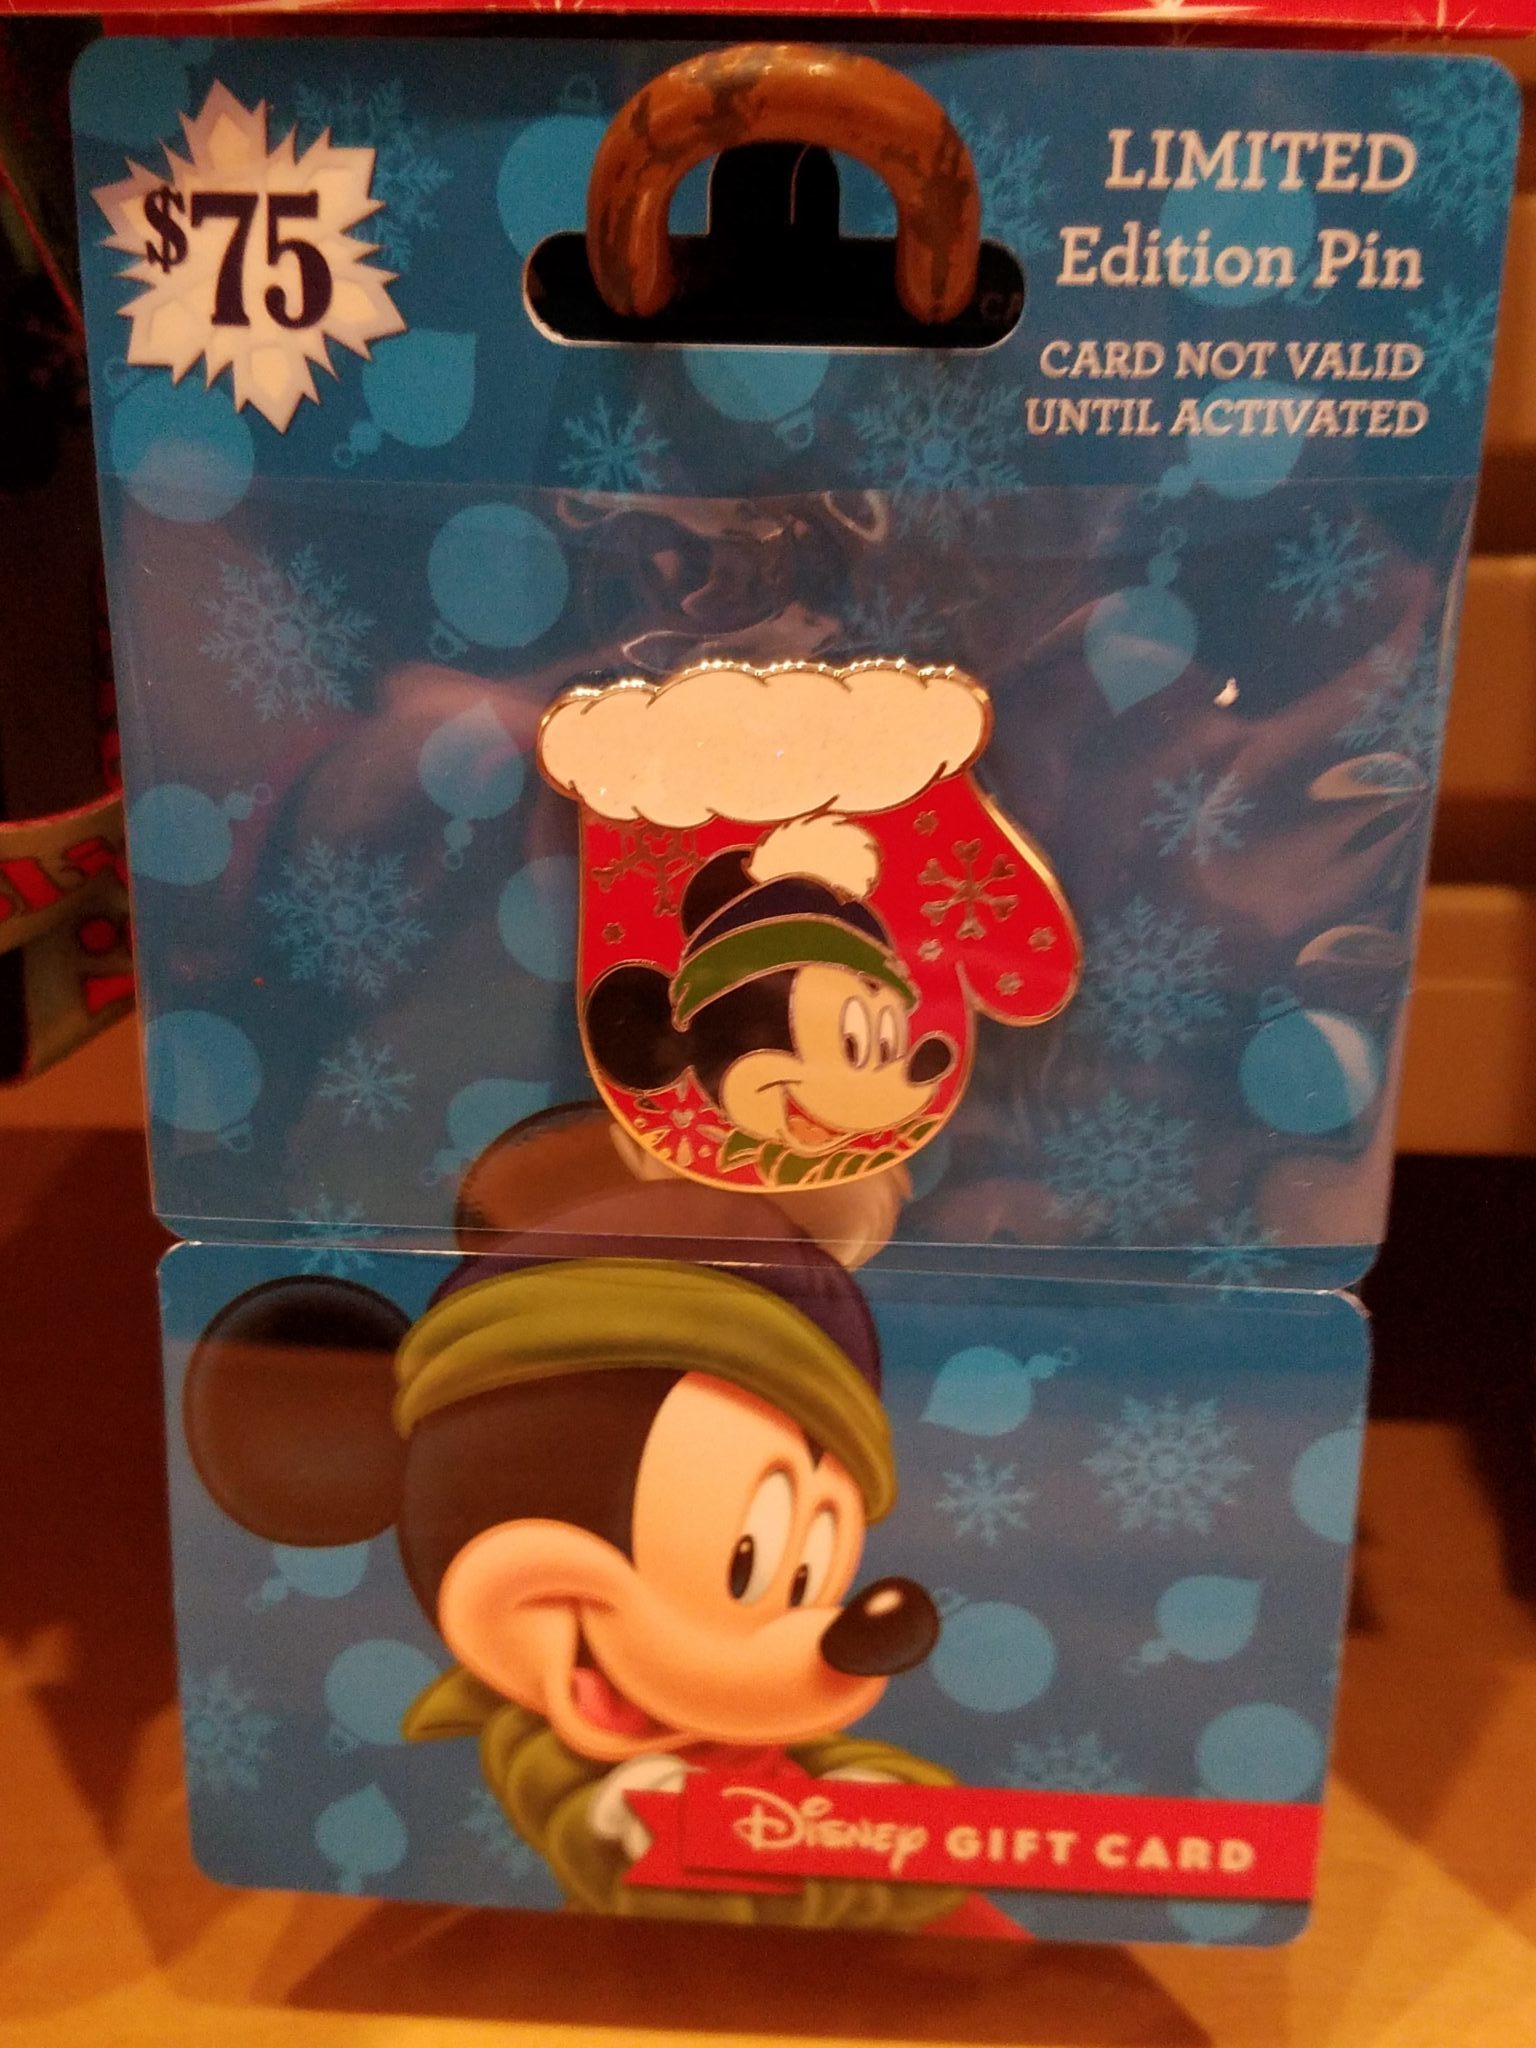 Disney 2016 Limited Edition Pin Gift Cards Make The Perfect Gift This Holiday Season